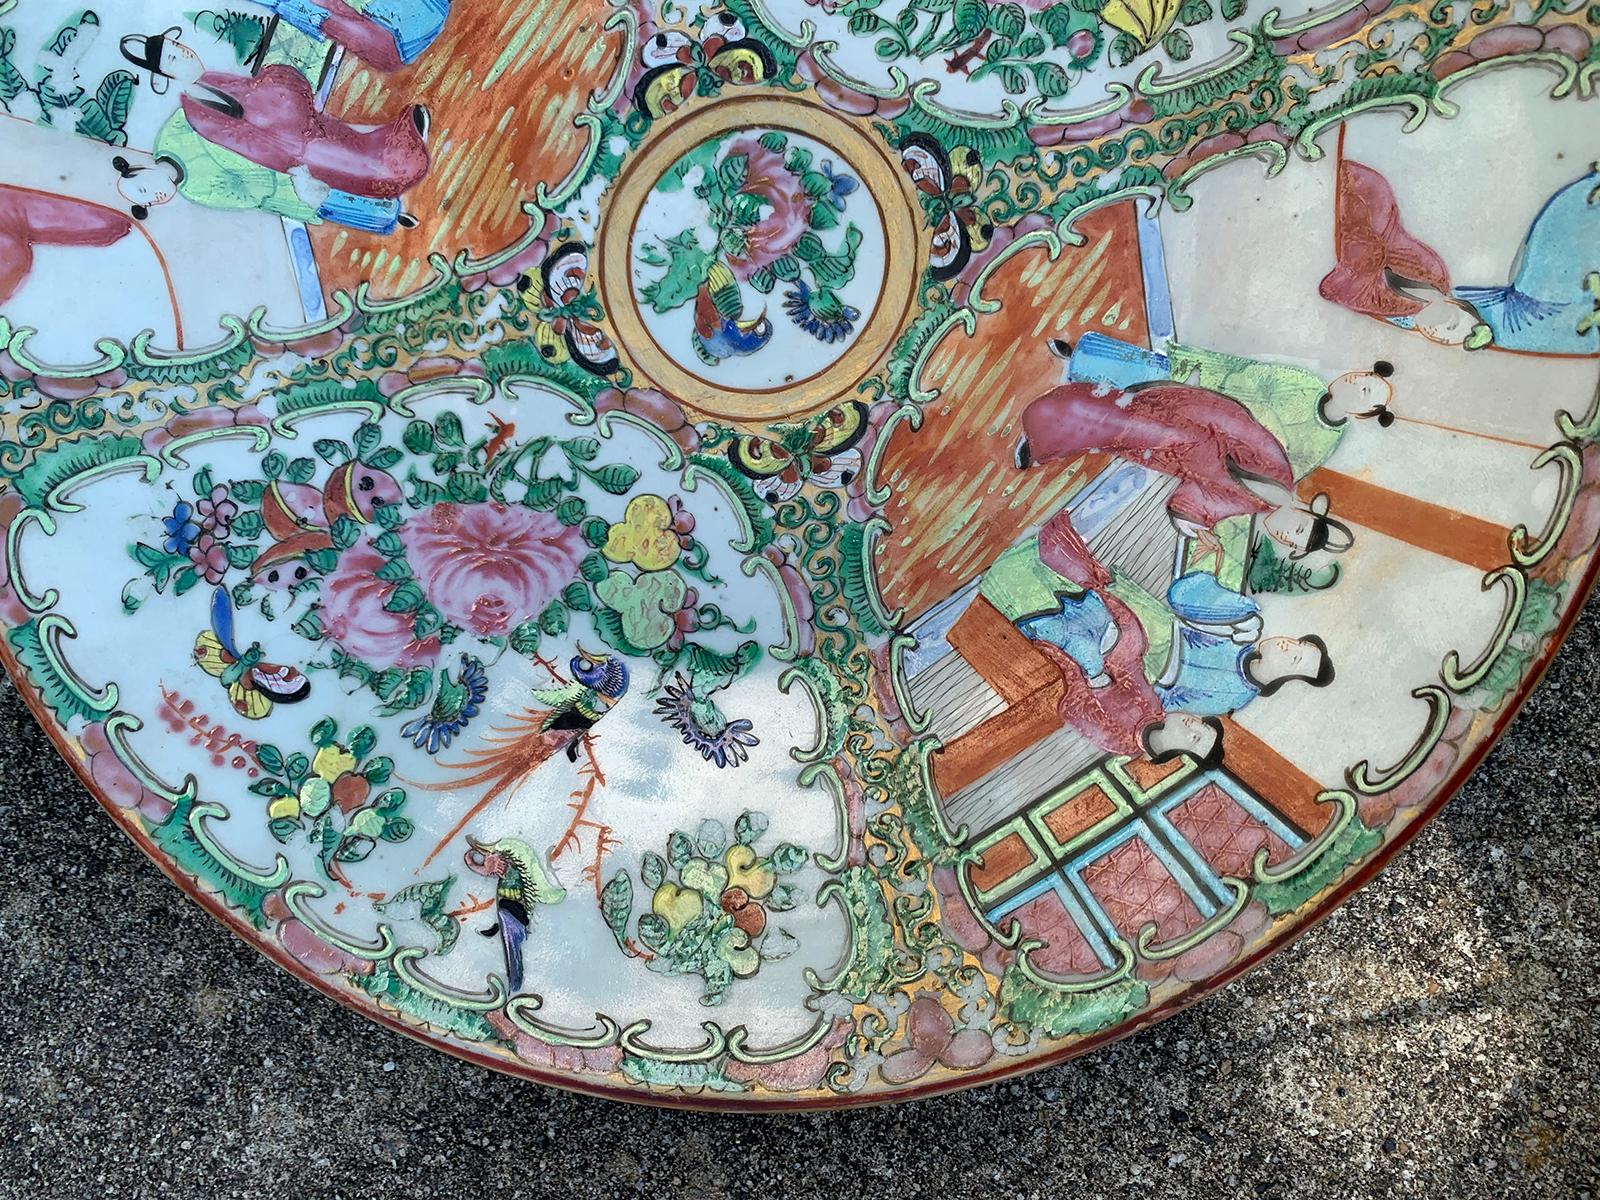 19th-20th Century Chinese Rose Medallion Porcelain Charger 2